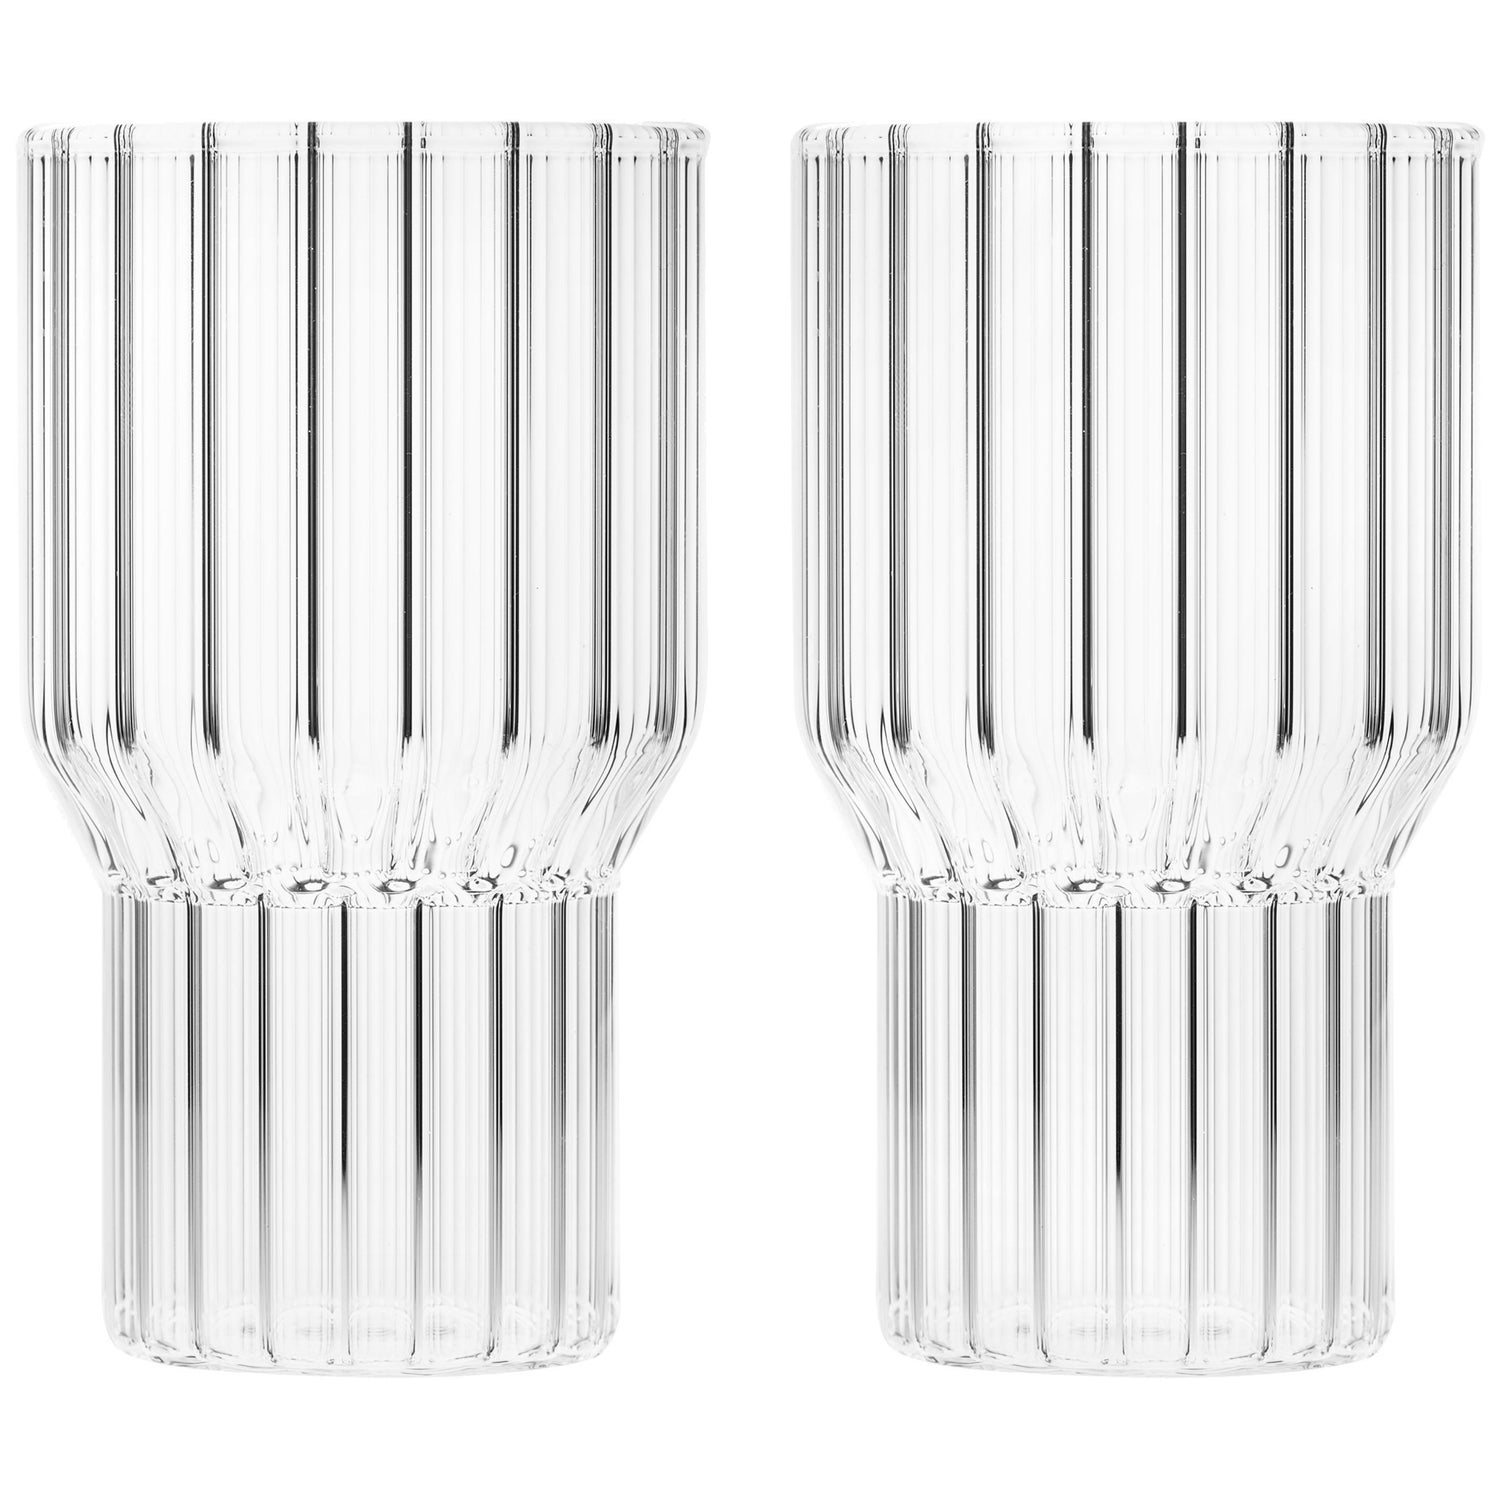 Cute Glassware Perfect for Hosts & Hostesses – StyleCaster